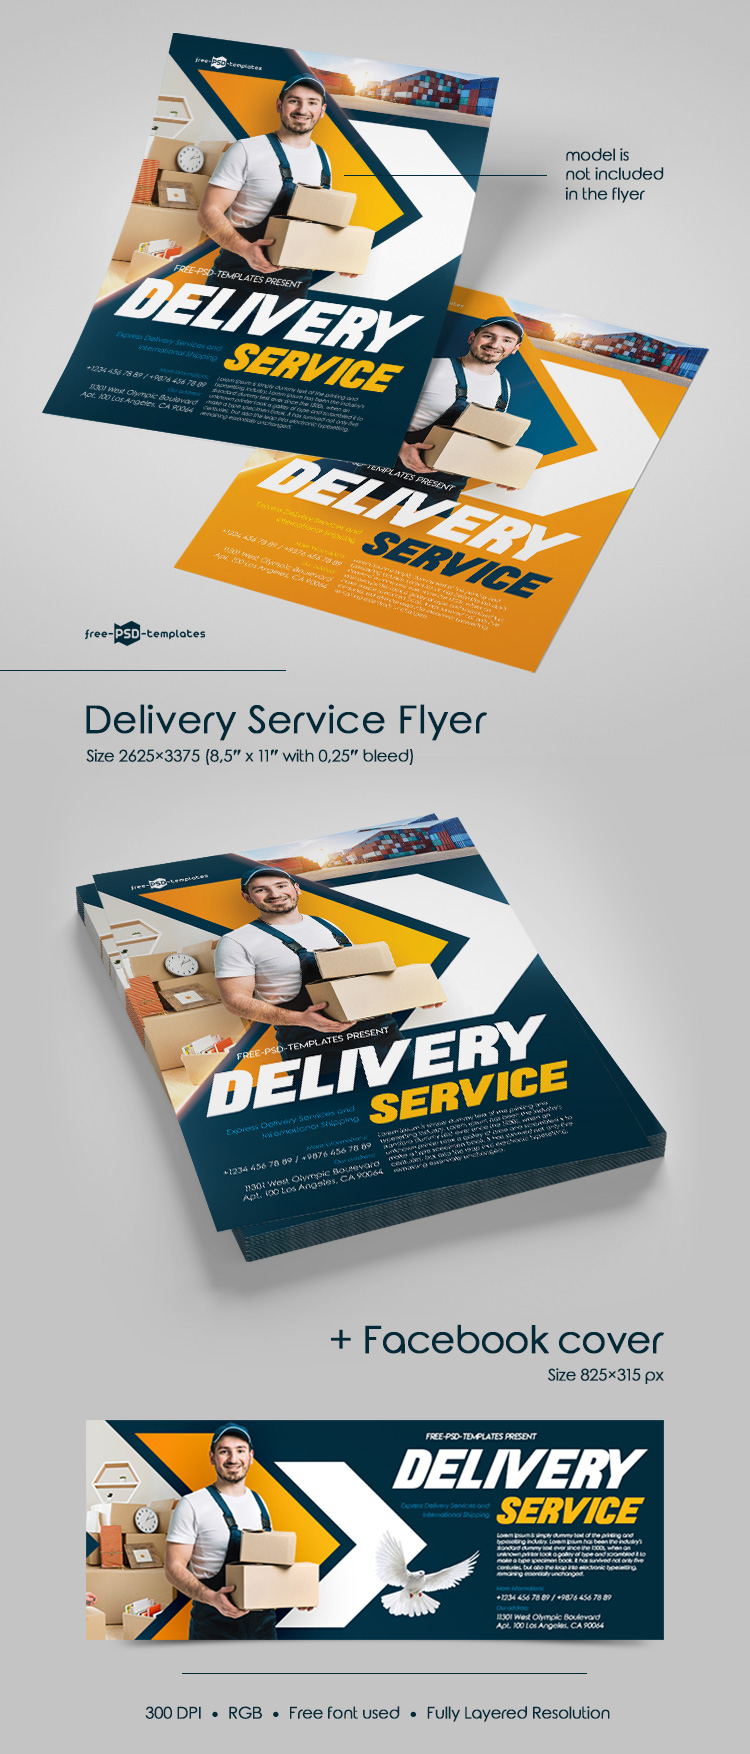 Free Delivery Service Flyer in PSD  Free PSD Templates Throughout Flyer Design Templates Psd Free Download